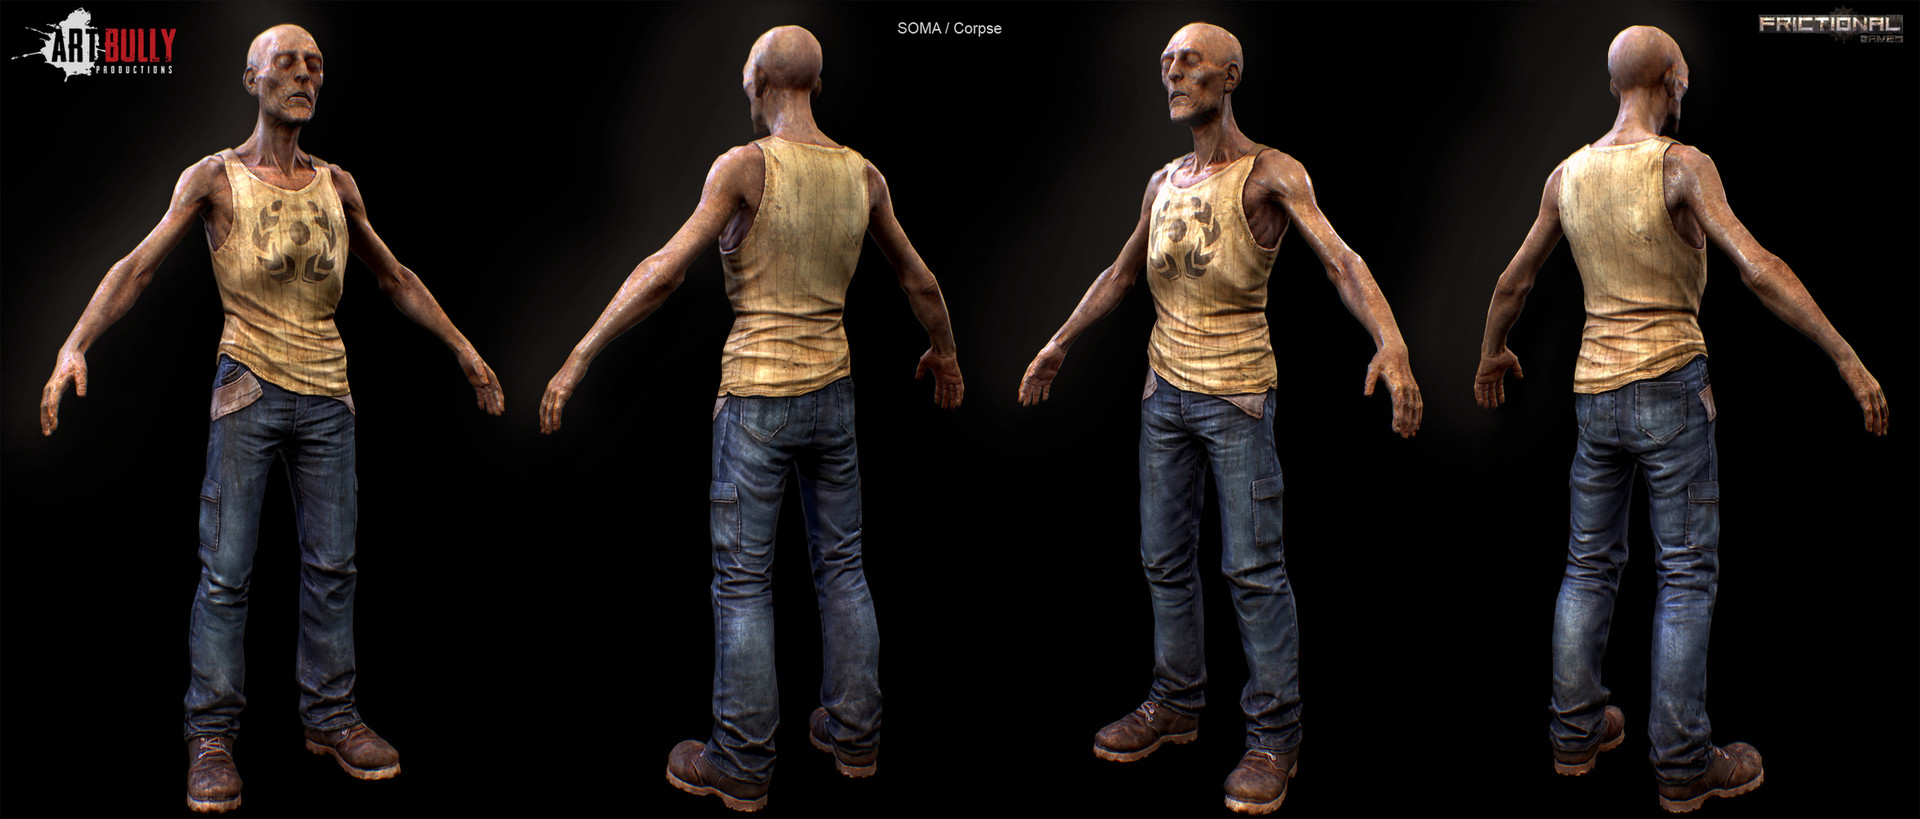 Concept and Art direction - Frictional Games Highpoly, Lowpoly and Textures...